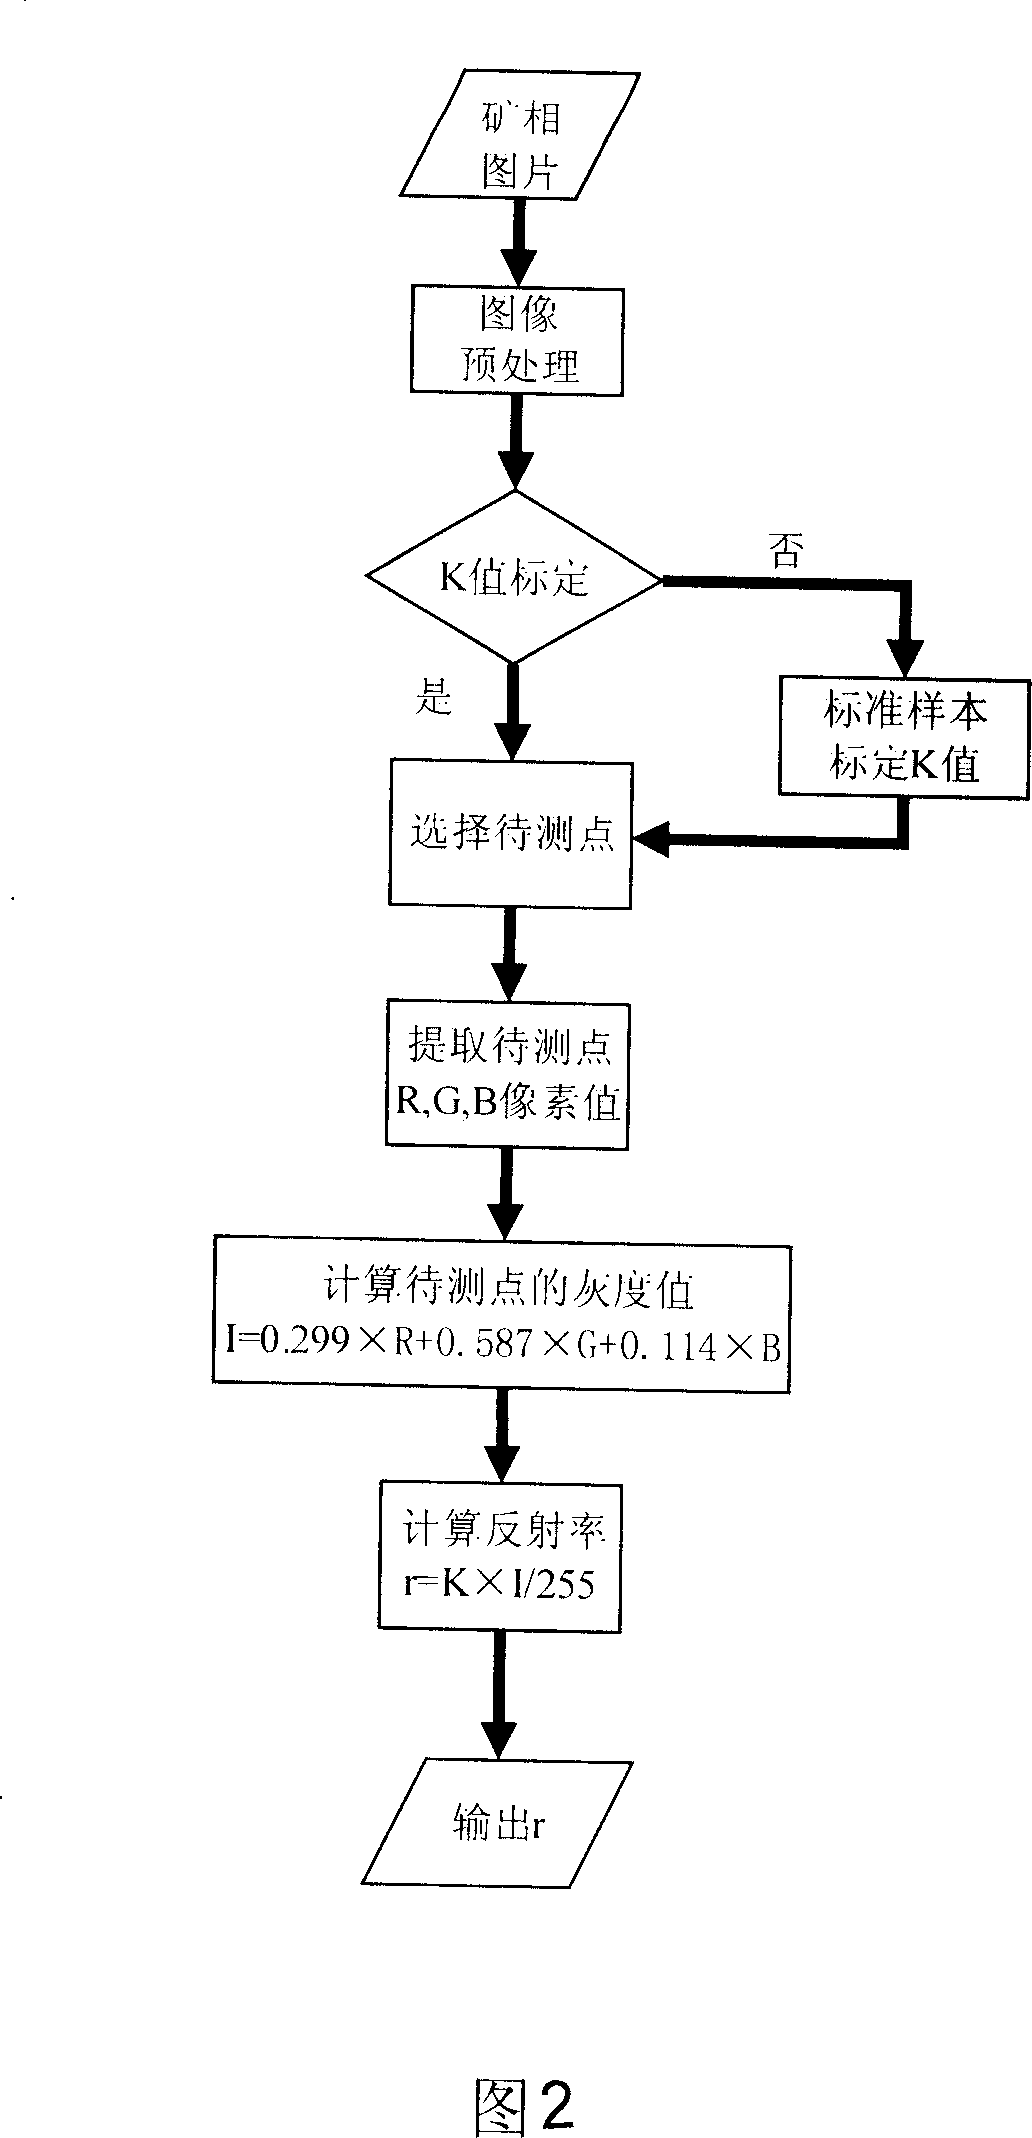 Method for measuring reflectivity of mineral and composition of mineral phase